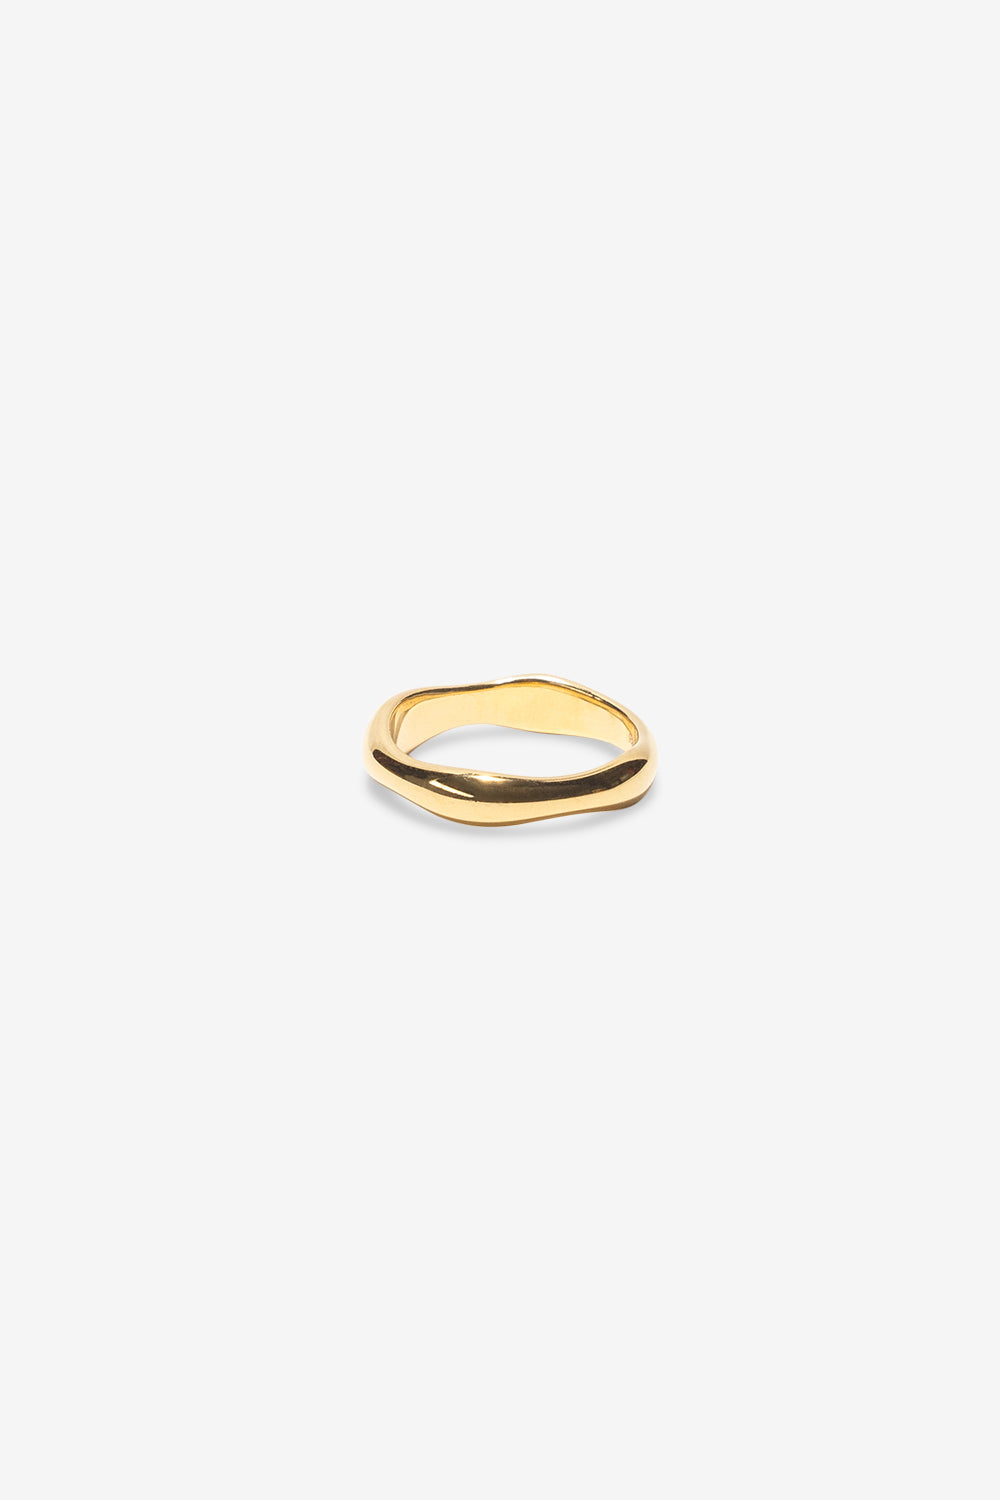 Waves Ring - Solid 9k Gold